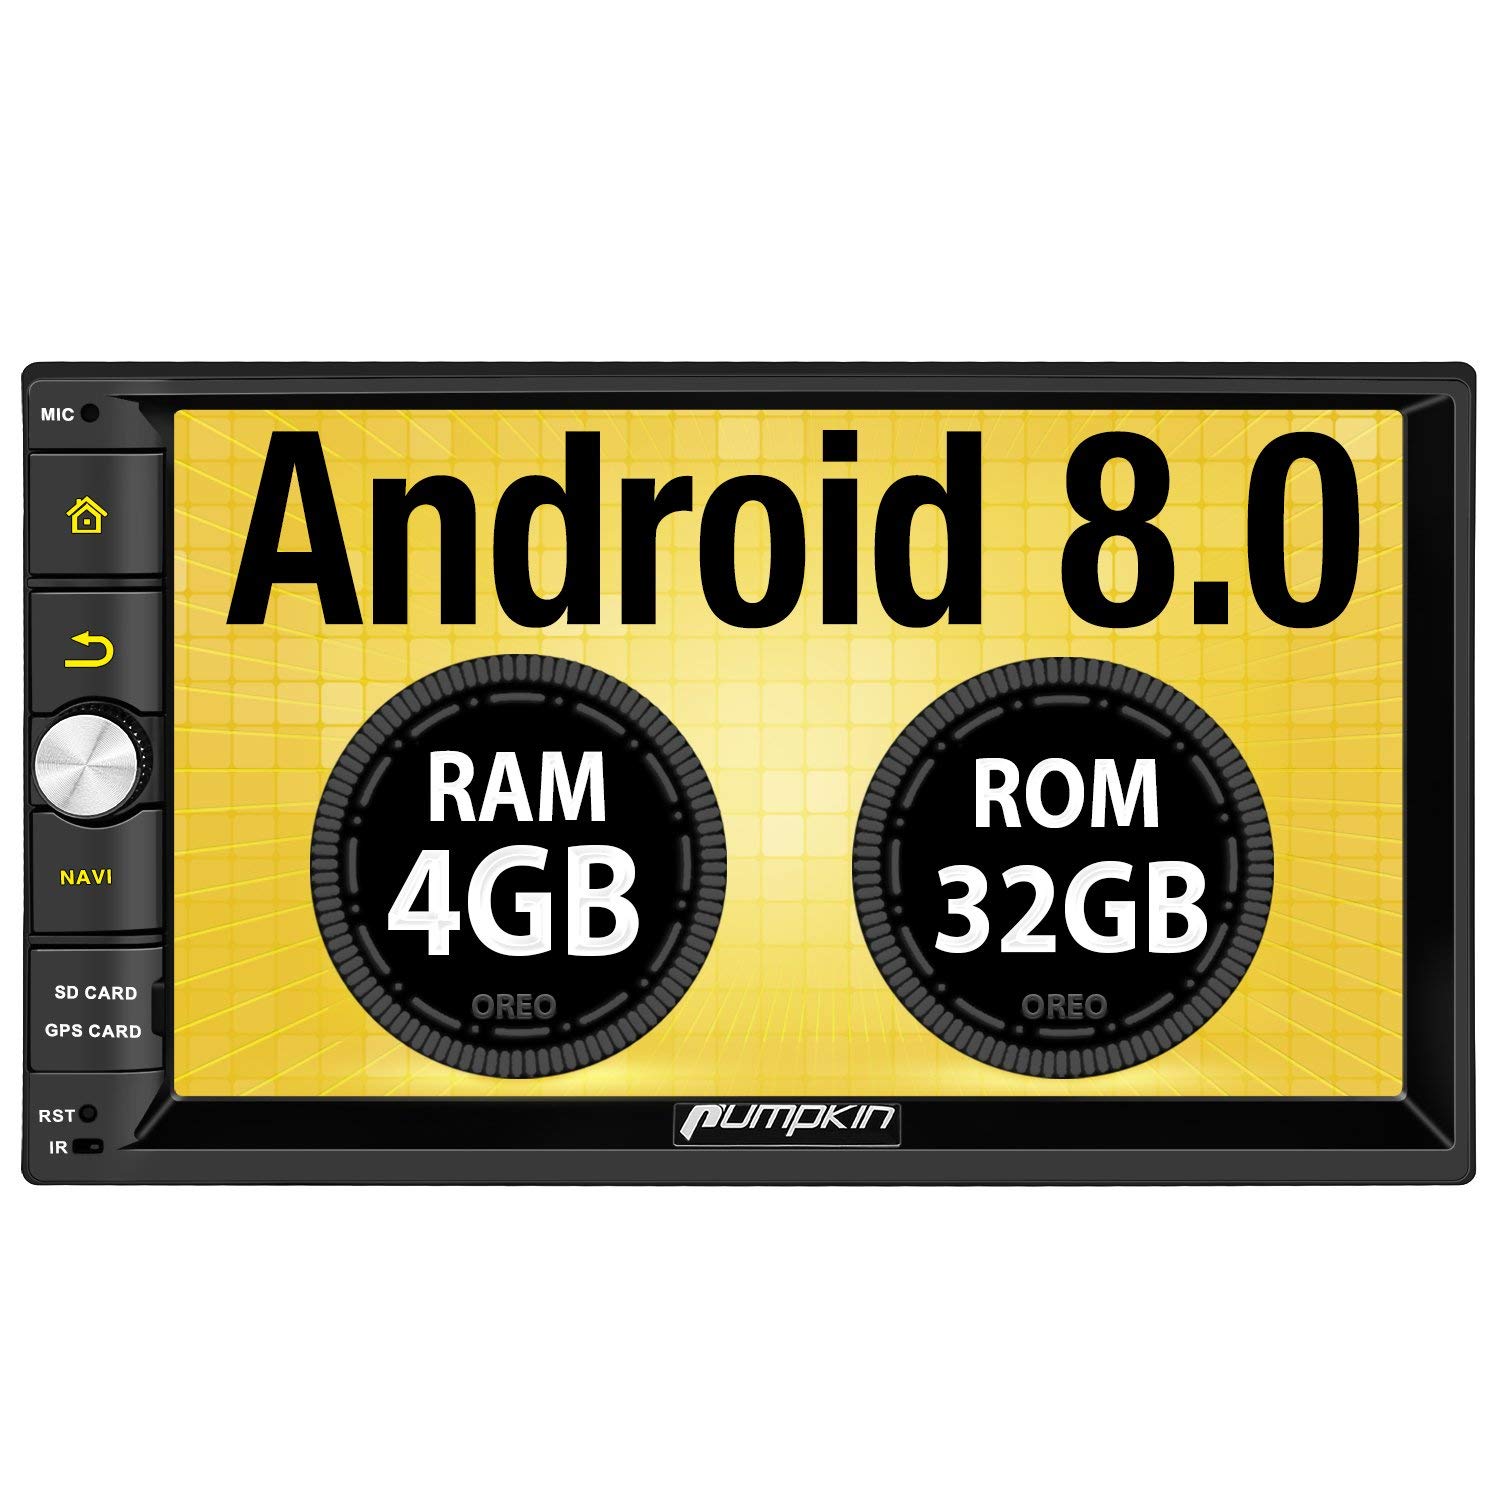 PUMPKIN Android 8.0 Car Stereo Double Din 4GB with GPS and WiFi, Android Auto, Support Fastboot, Backup Camera, 128GB USB SD, 7 inch Touch Screen